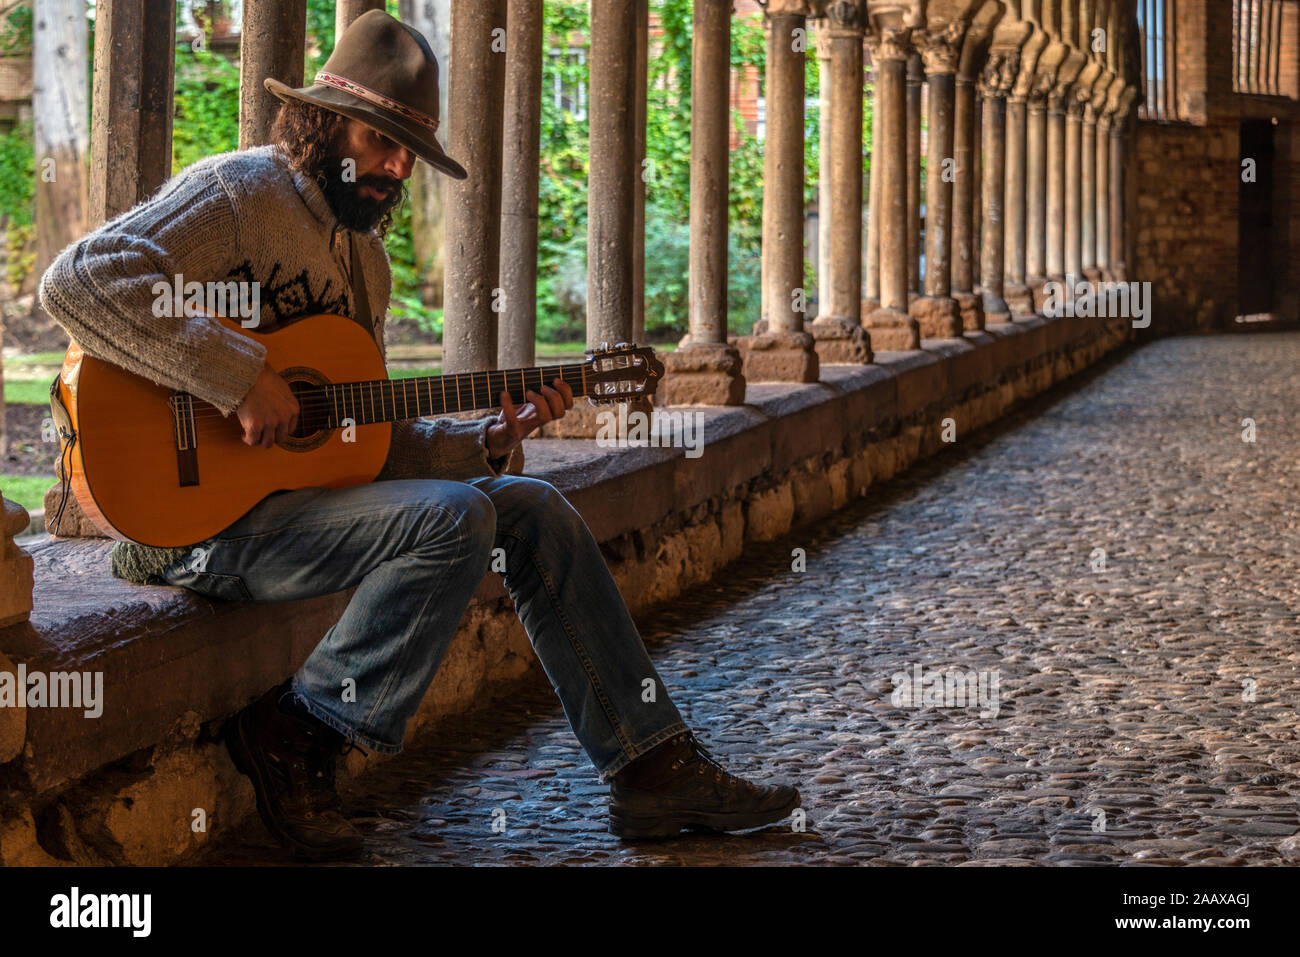 A bearded guitarist with felt hat, playing a Spanish or classical guitar, in the medieval cloisters of St Salvy church, Albi, southern France. Stock Photo